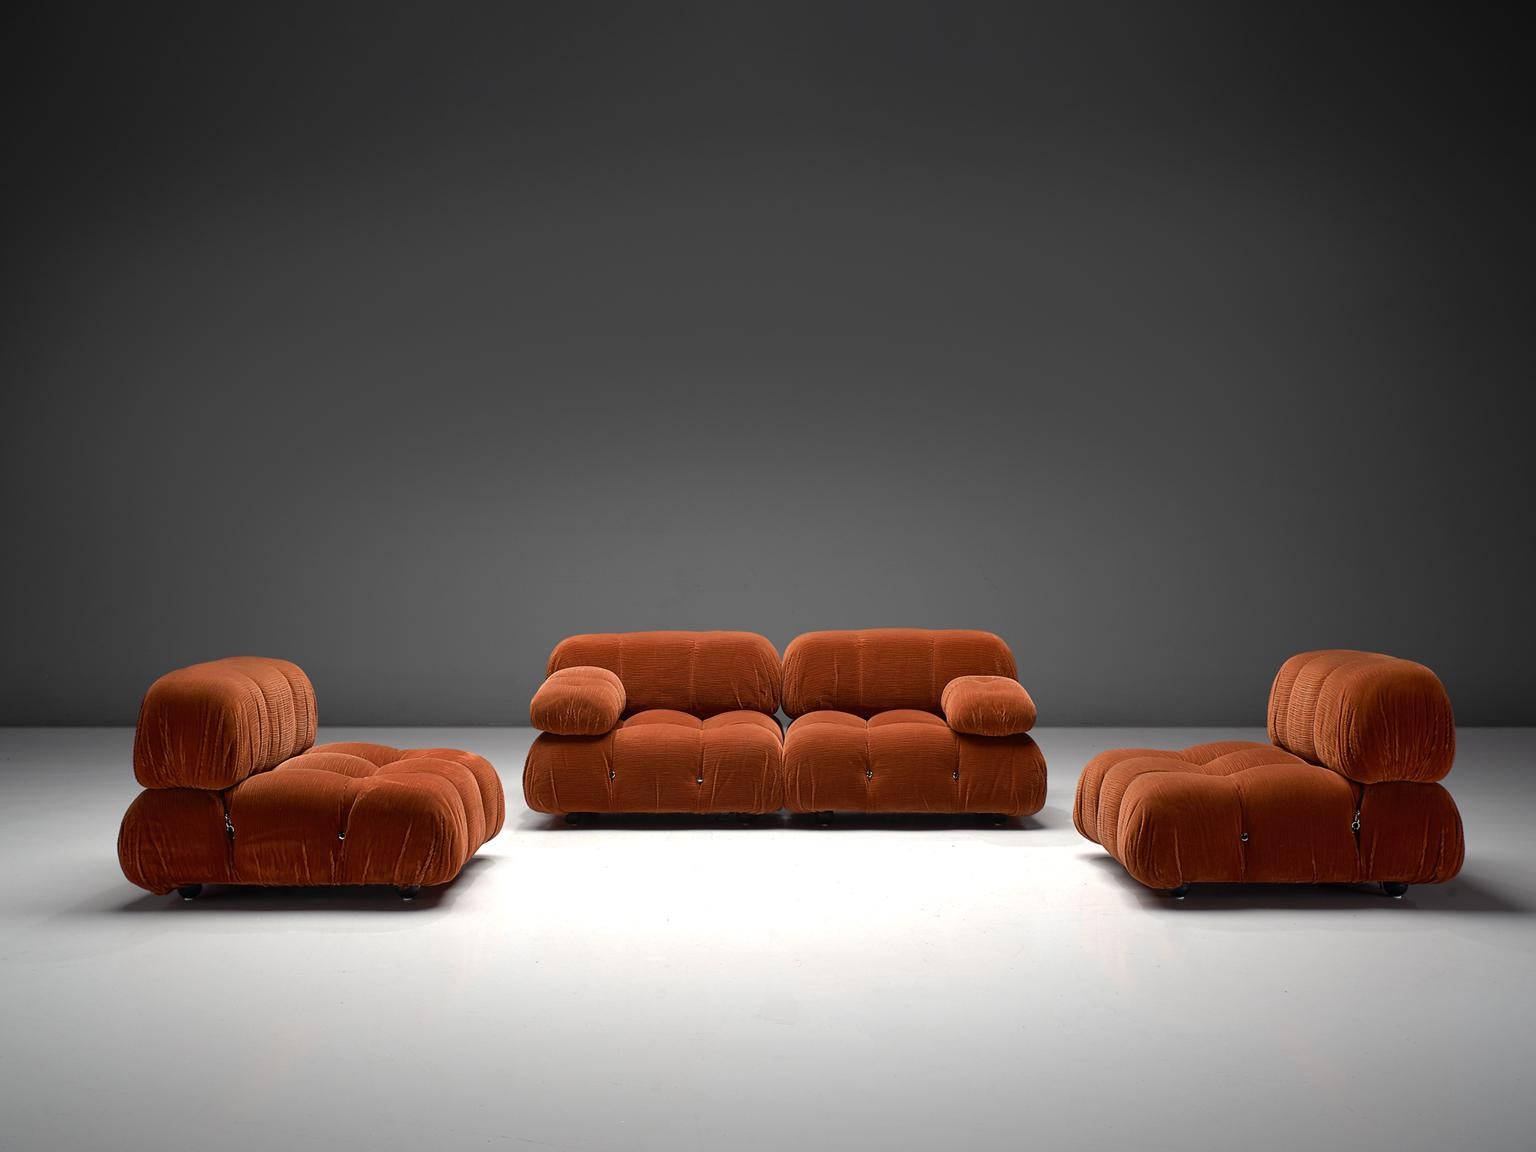 Mario Bellini, modular 'Cameleonda' sofa in in orange corduroy, Italy 1972.

The sectional elements of this sofa can be used freely and apart from one another. The upholstery on this piece features an orange original velvet. The backs and armrests